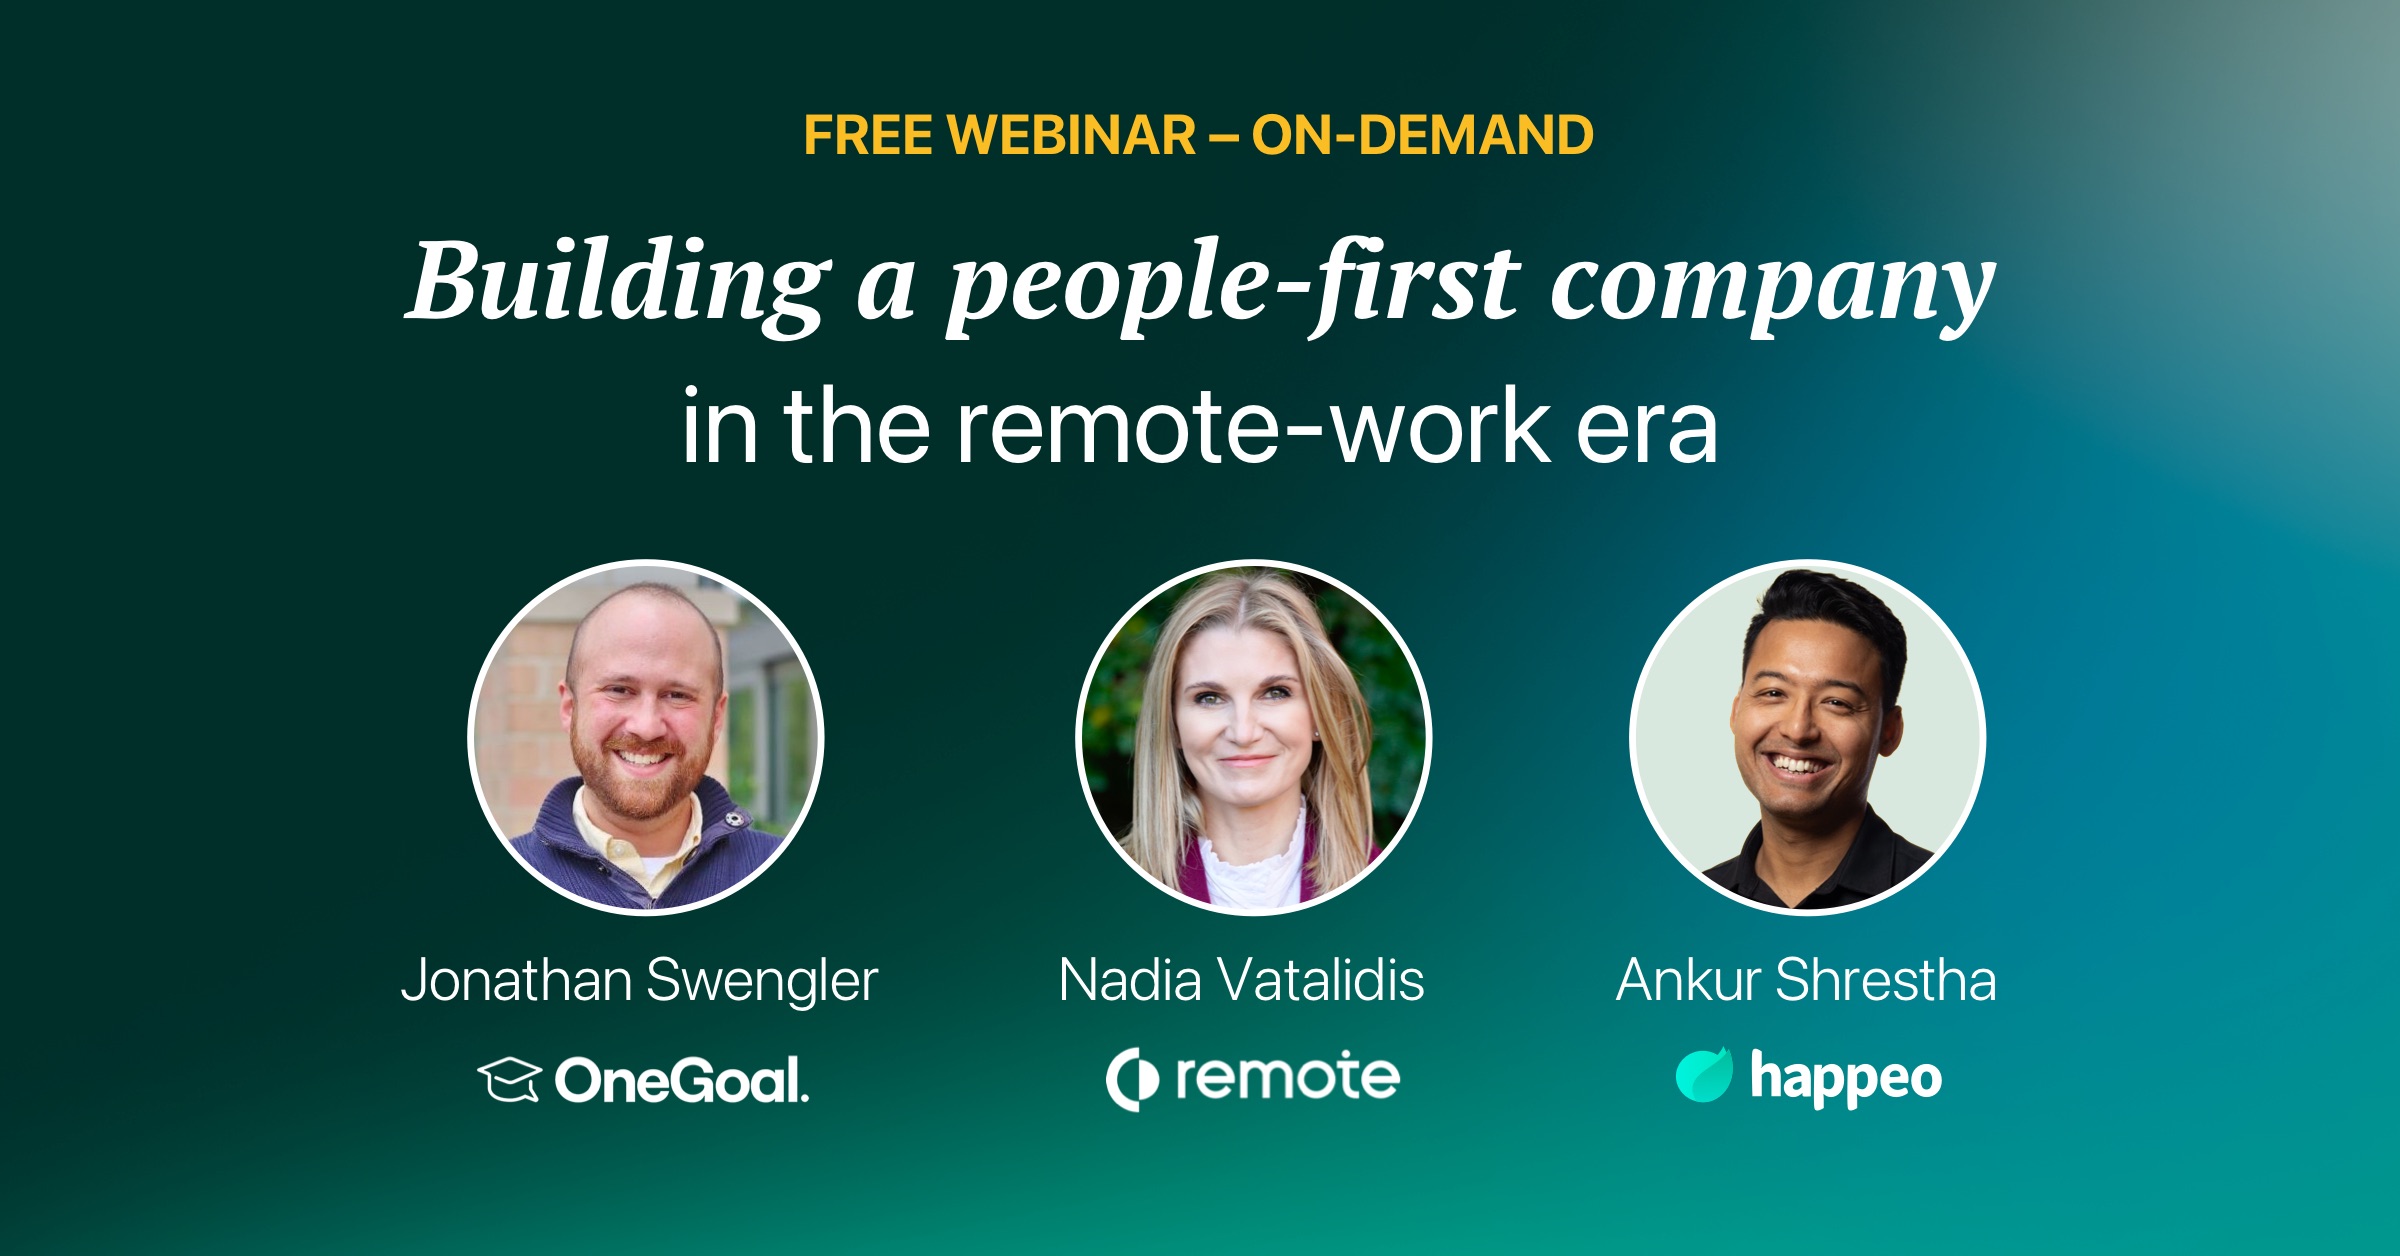 Building a people-first company in the remote-work era